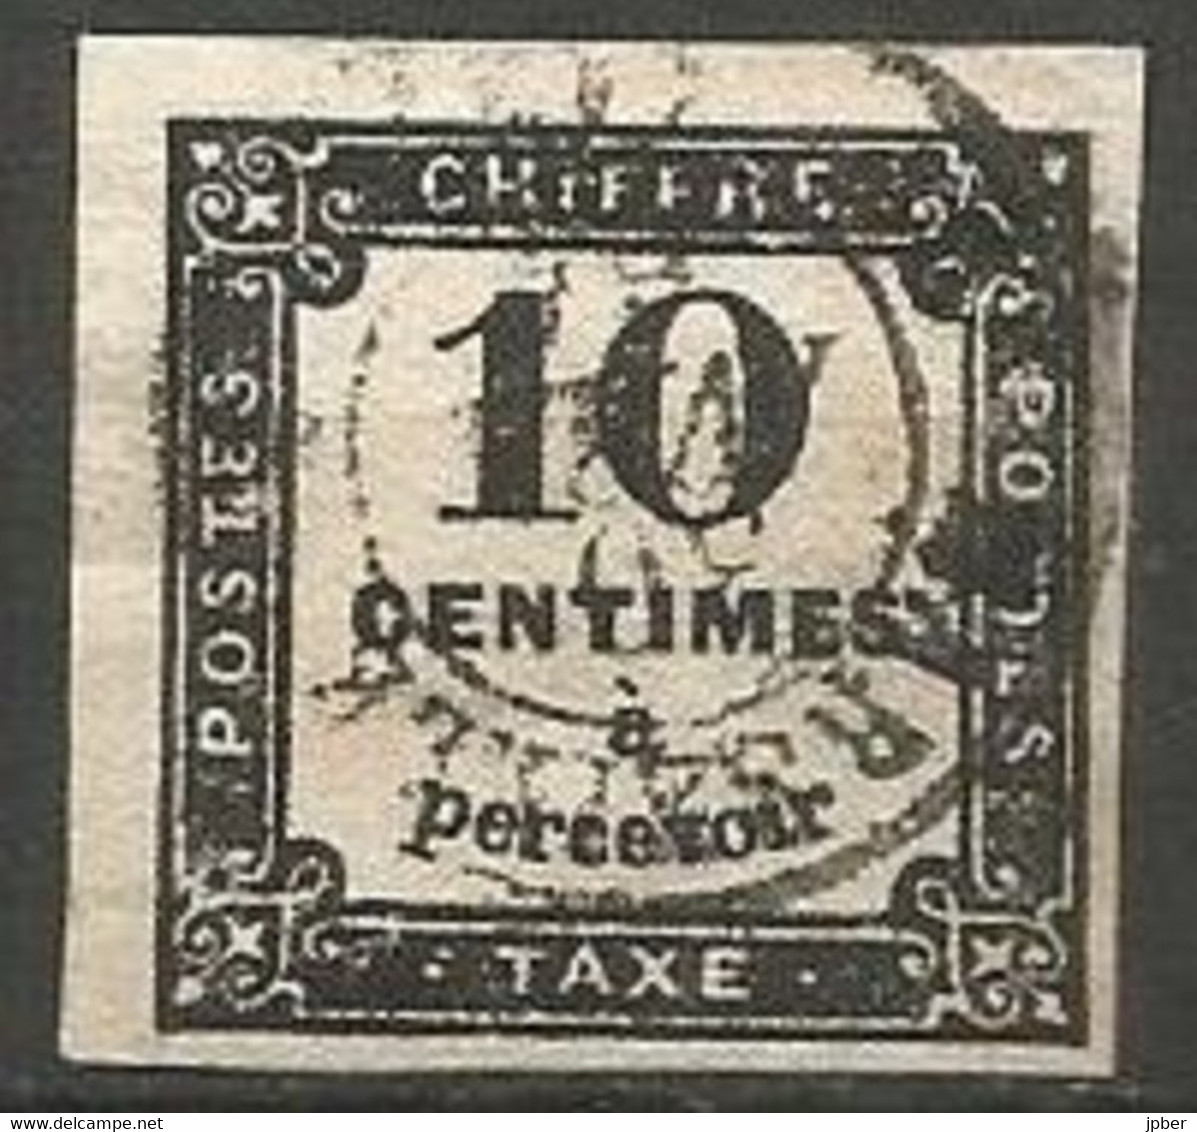 France - Timbres-Taxe - N° 2 Noir Typo - Obl. MARSEILLE - 1859-1959 Afgestempeld